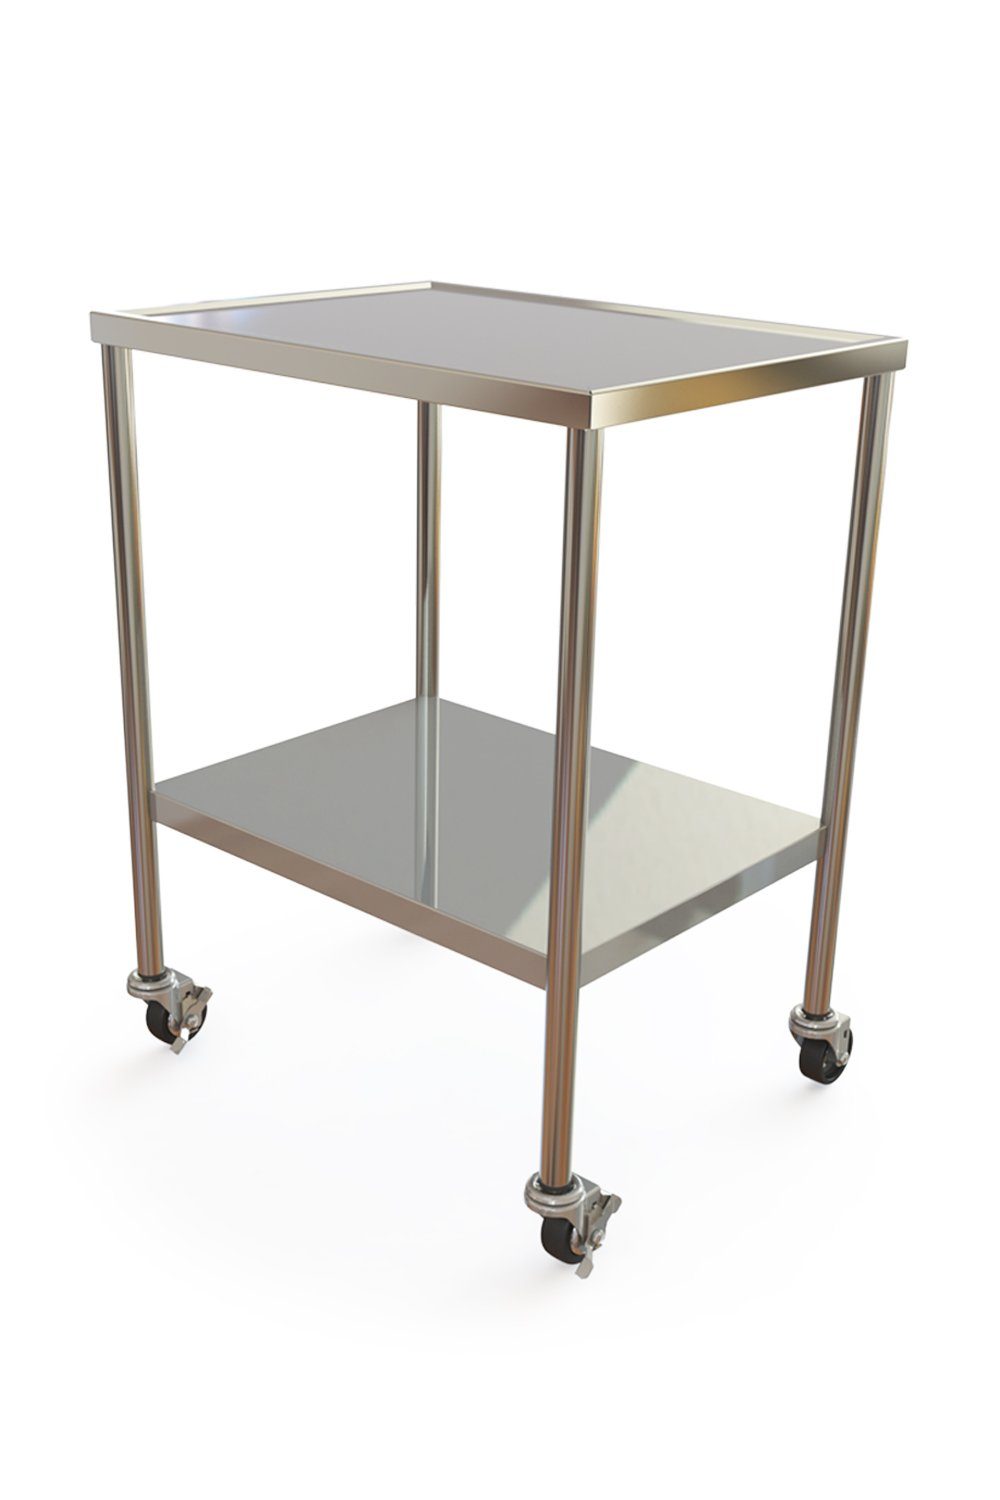 Blanket Warmer Stand Stainless Solutions Macmedical 20" D x 34" W x 34" H SWC183036 